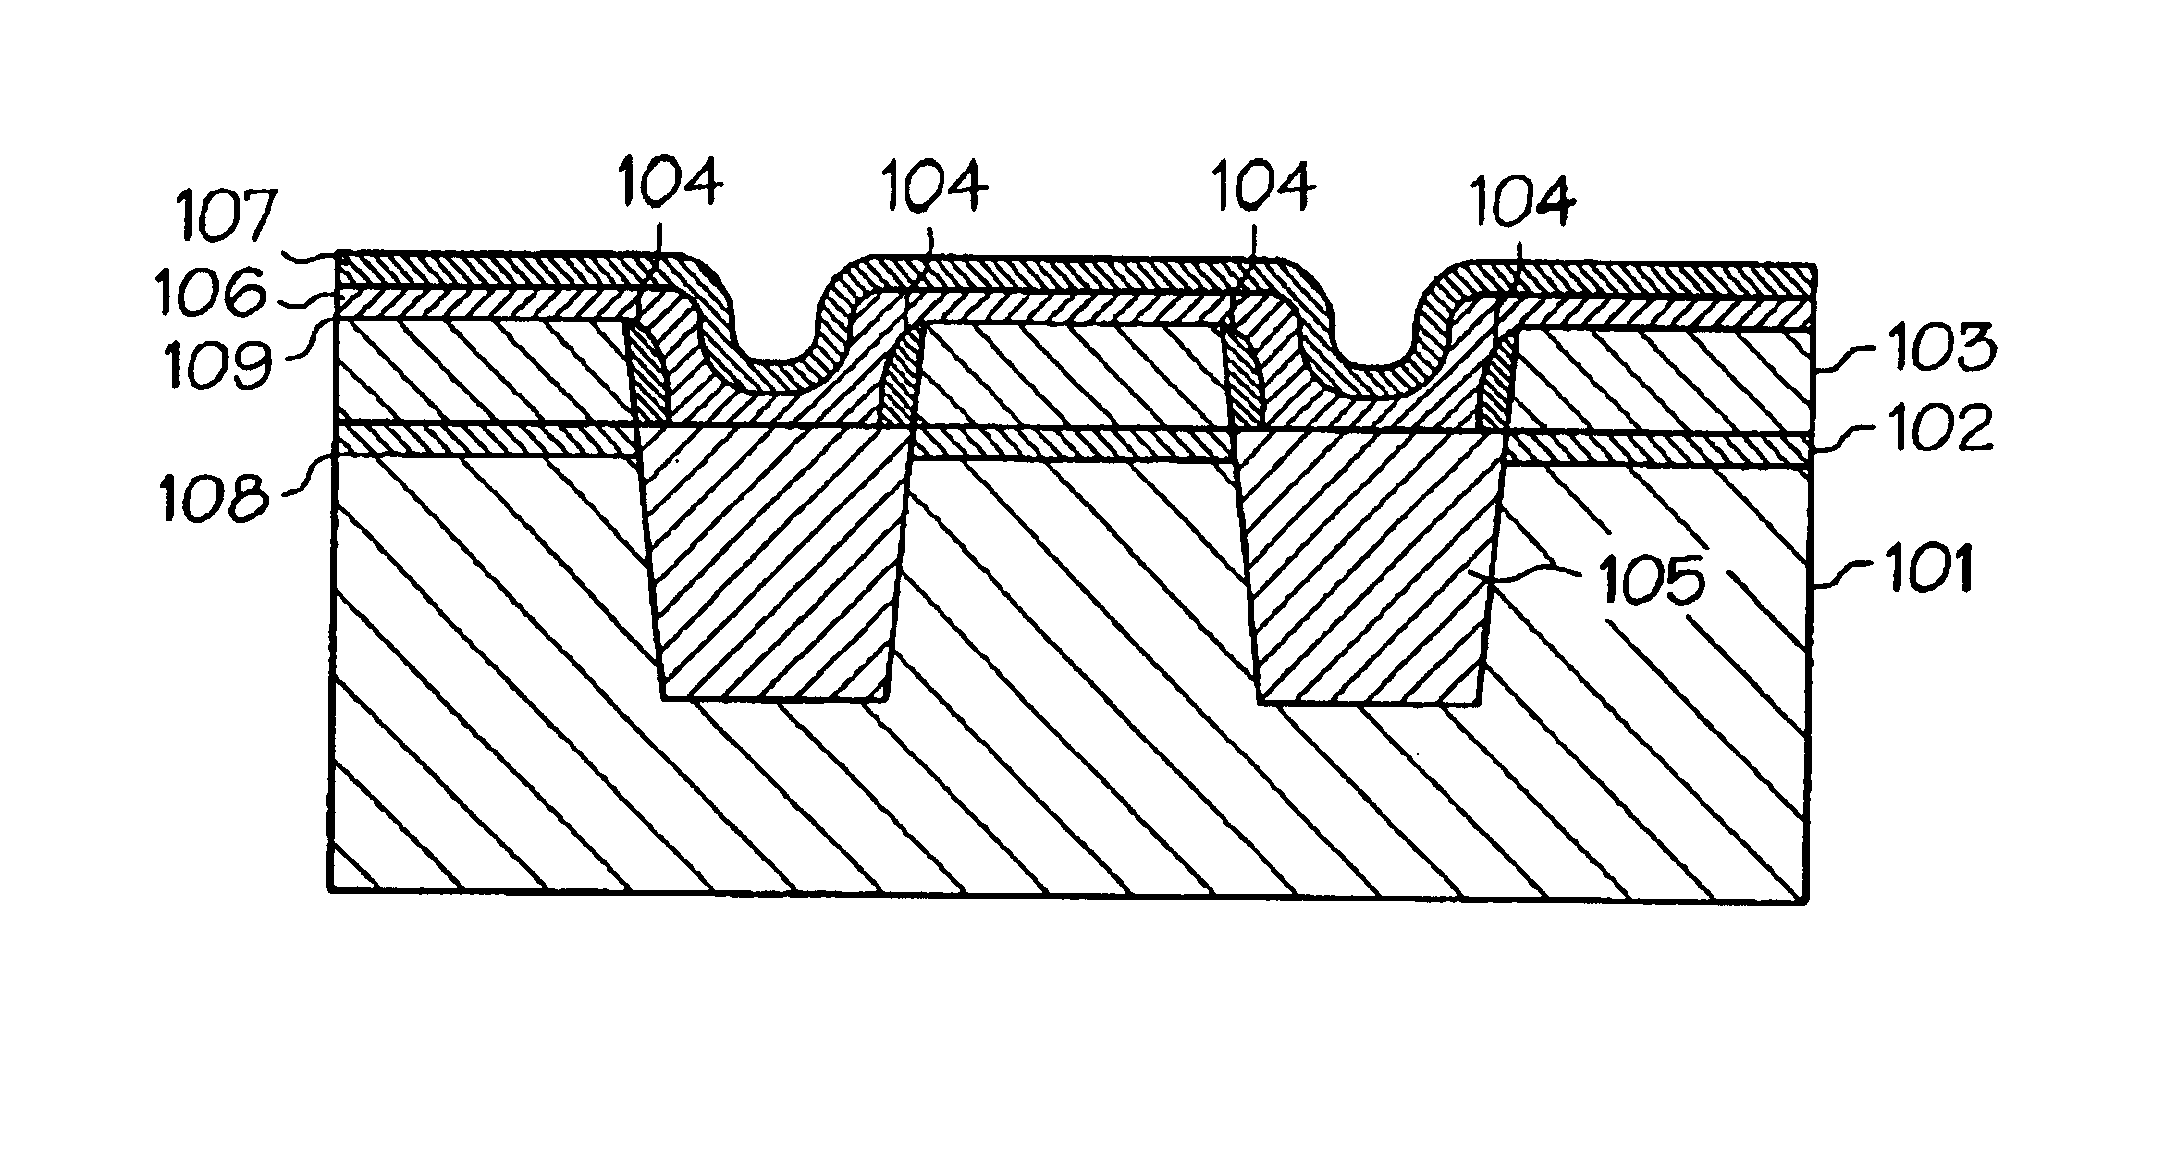 Stacked gate region of a memory cell in a memory device